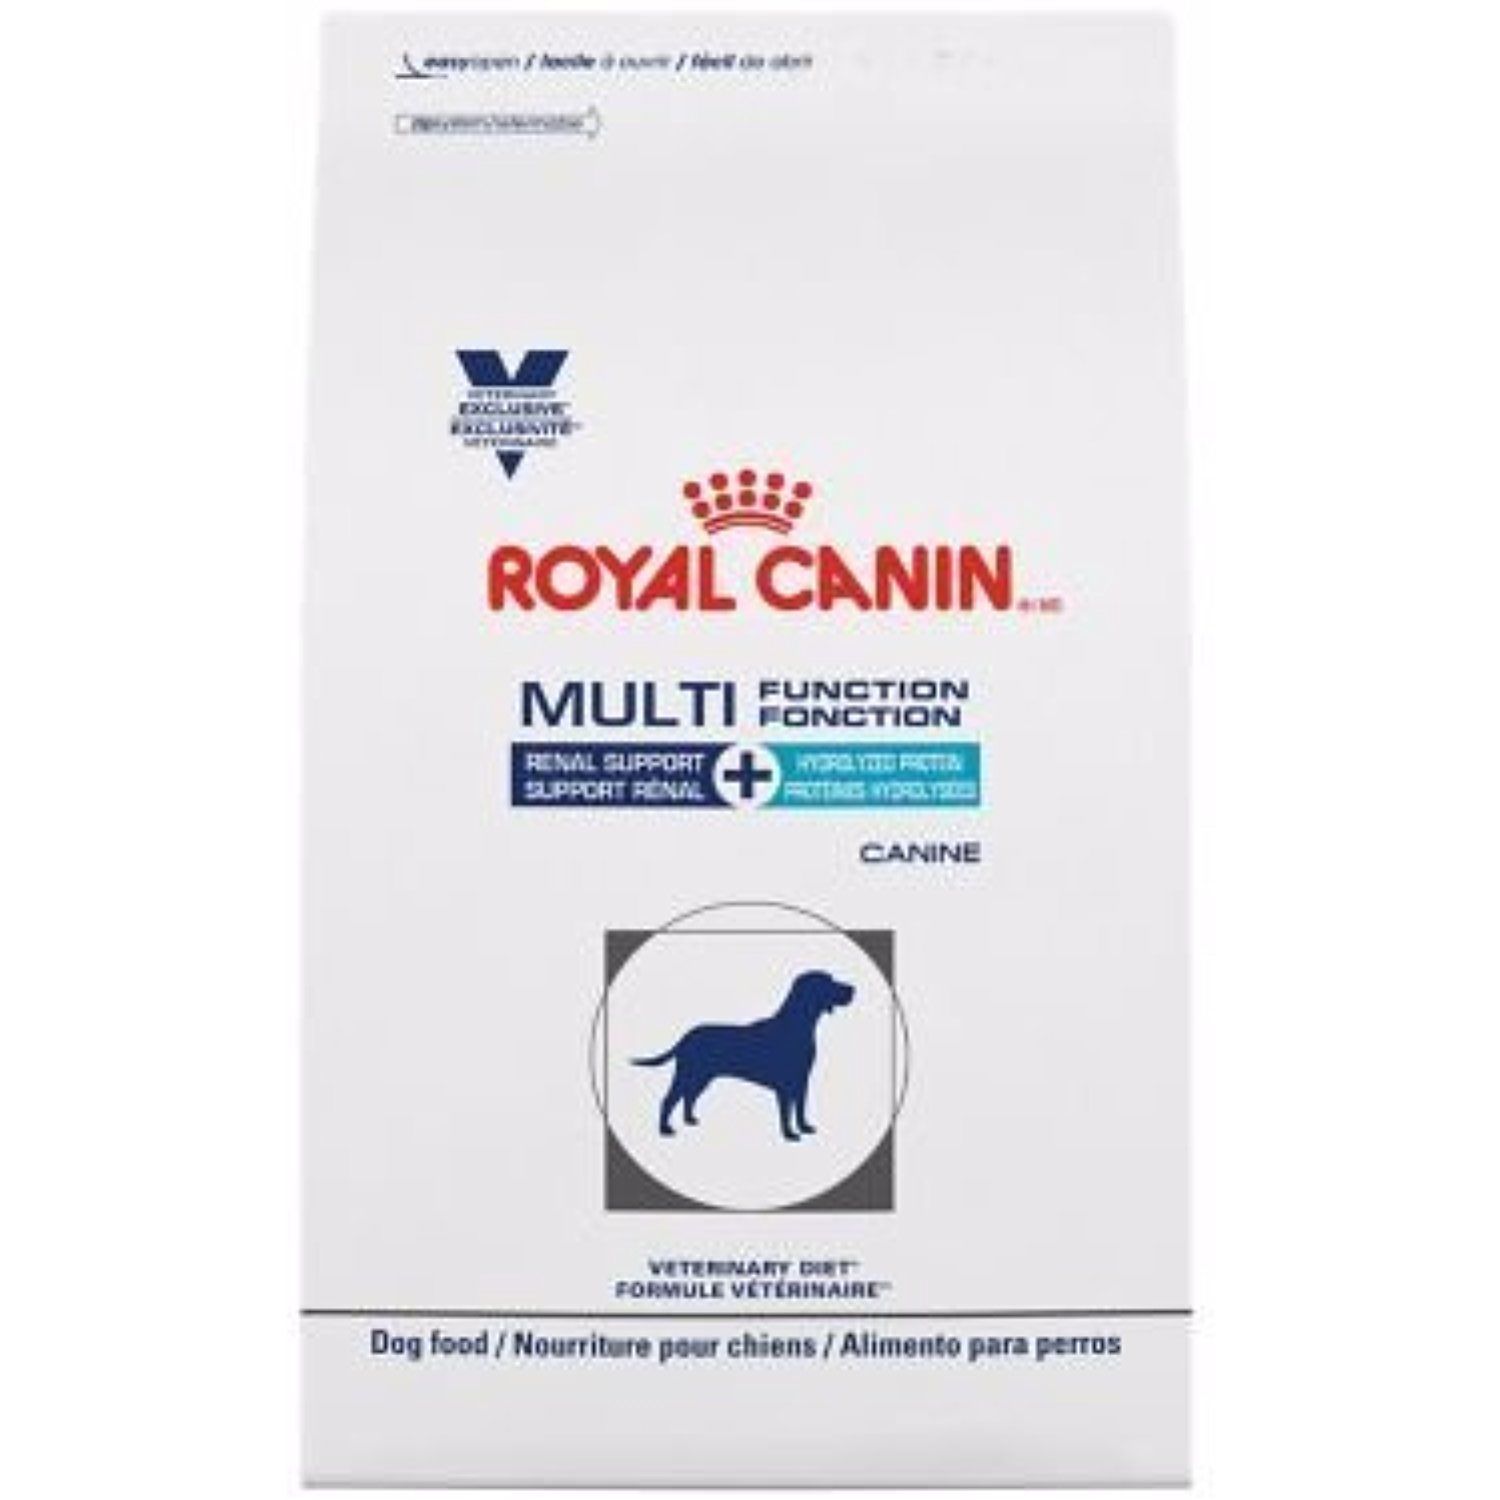 Royal Canin Canine Multifunction Urinary Hydrolyzed Protein